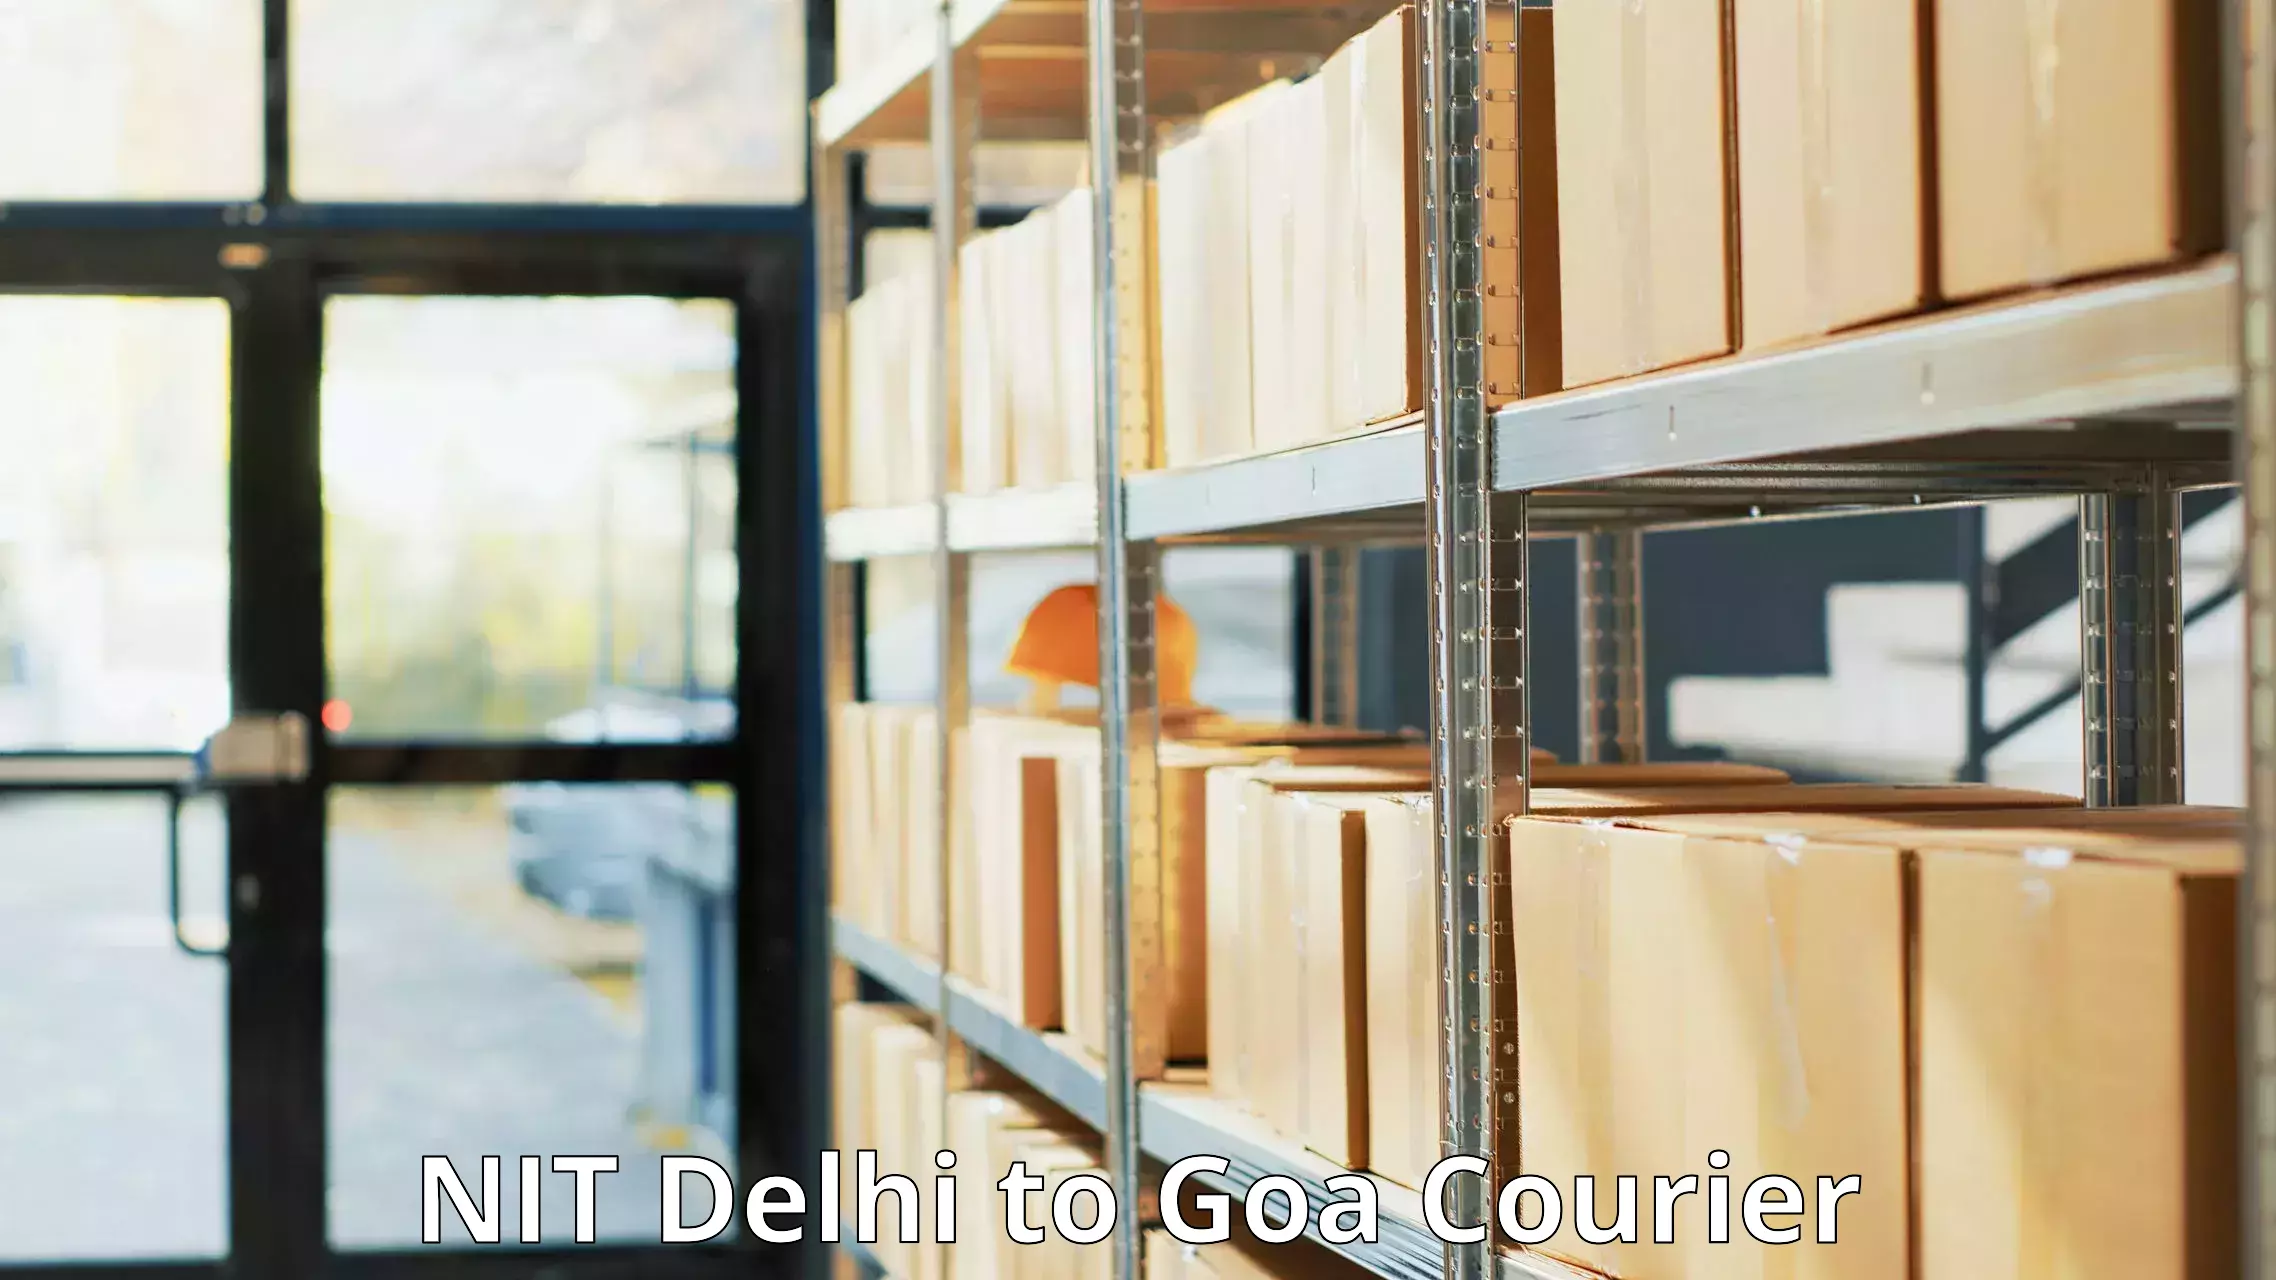 Personal courier services NIT Delhi to Goa